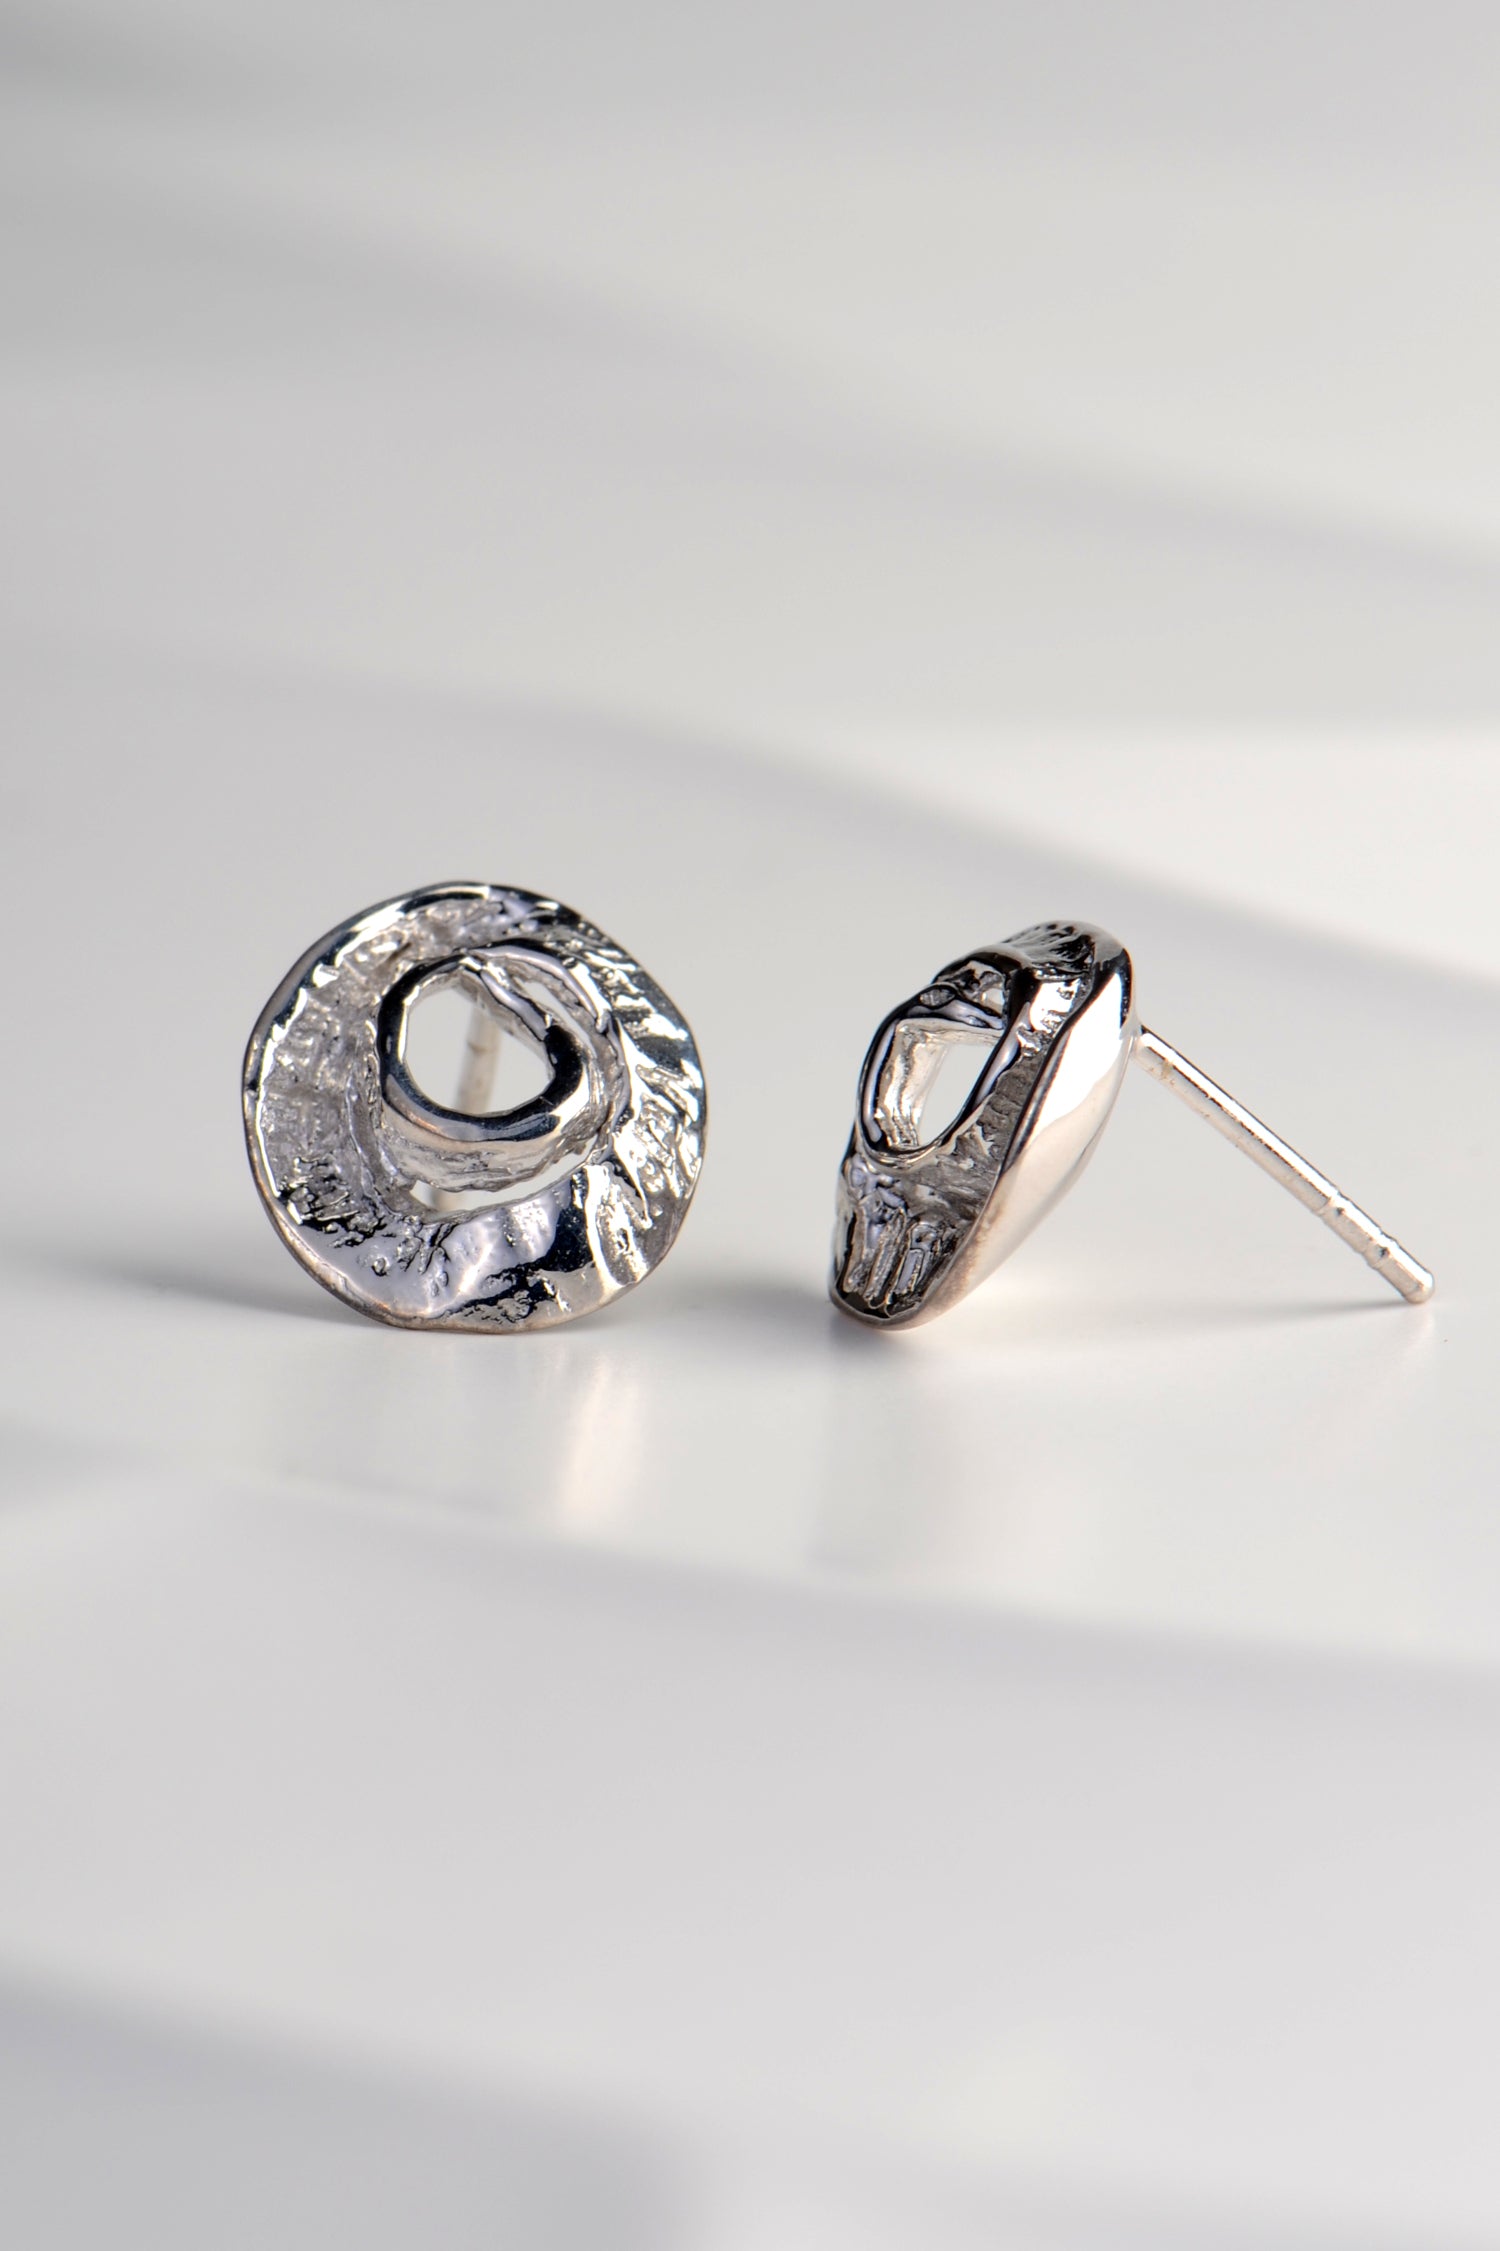 small circular stud earrings with ridged texture inspired by seaweed